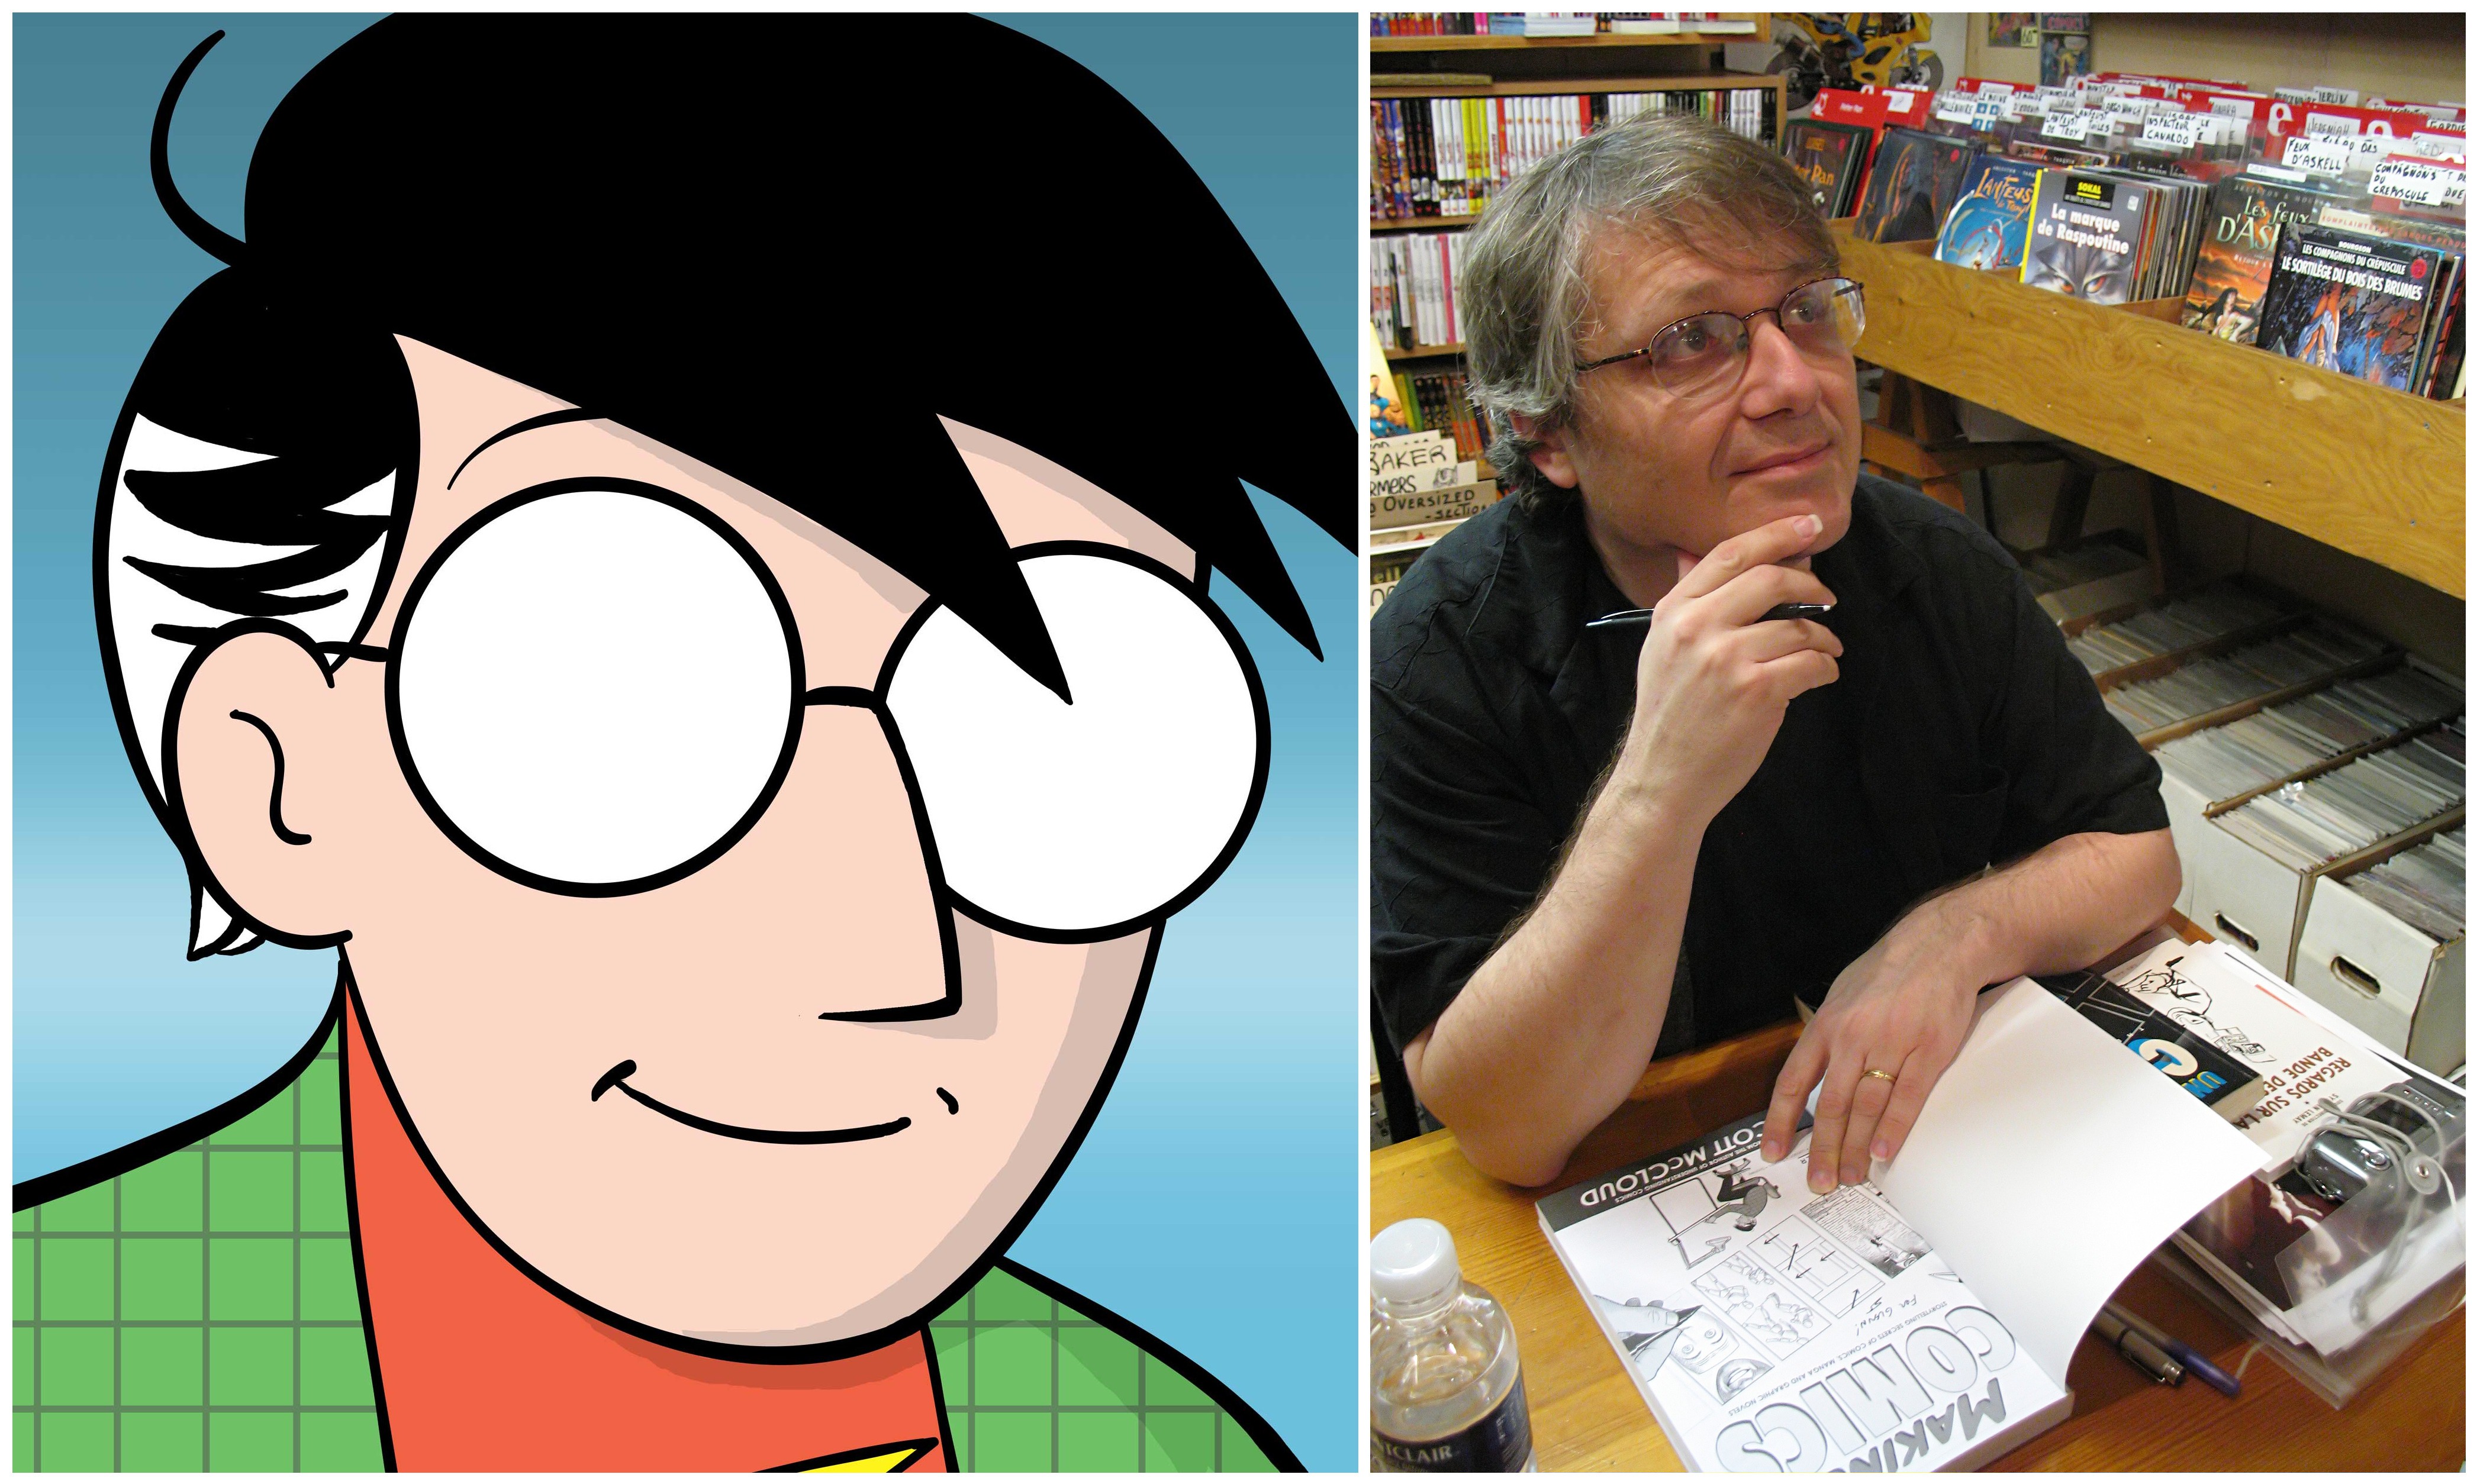 Scott McCloud's self-portrait, left, and McCloud pictured at a book signing, right.